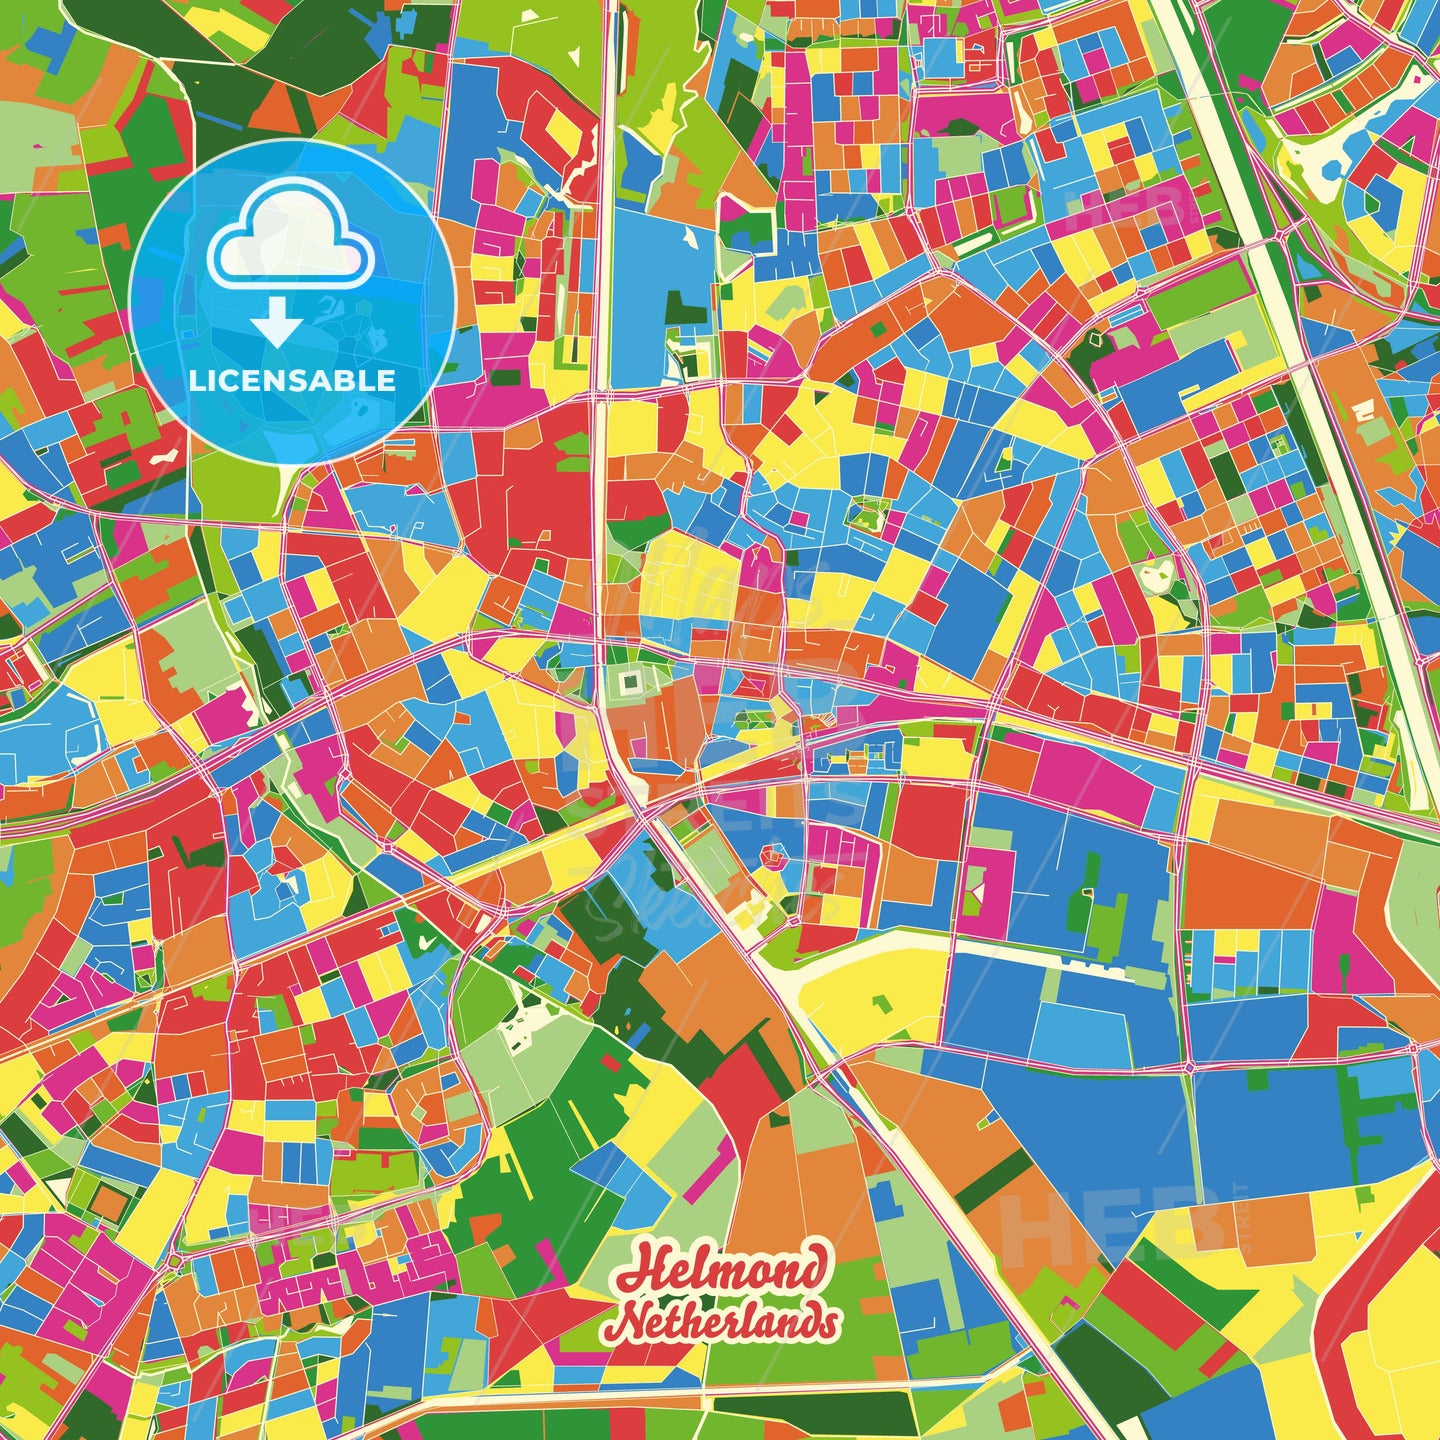 Helmond, Netherlands Crazy Colorful Street Map Poster Template - HEBSTREITS Sketches